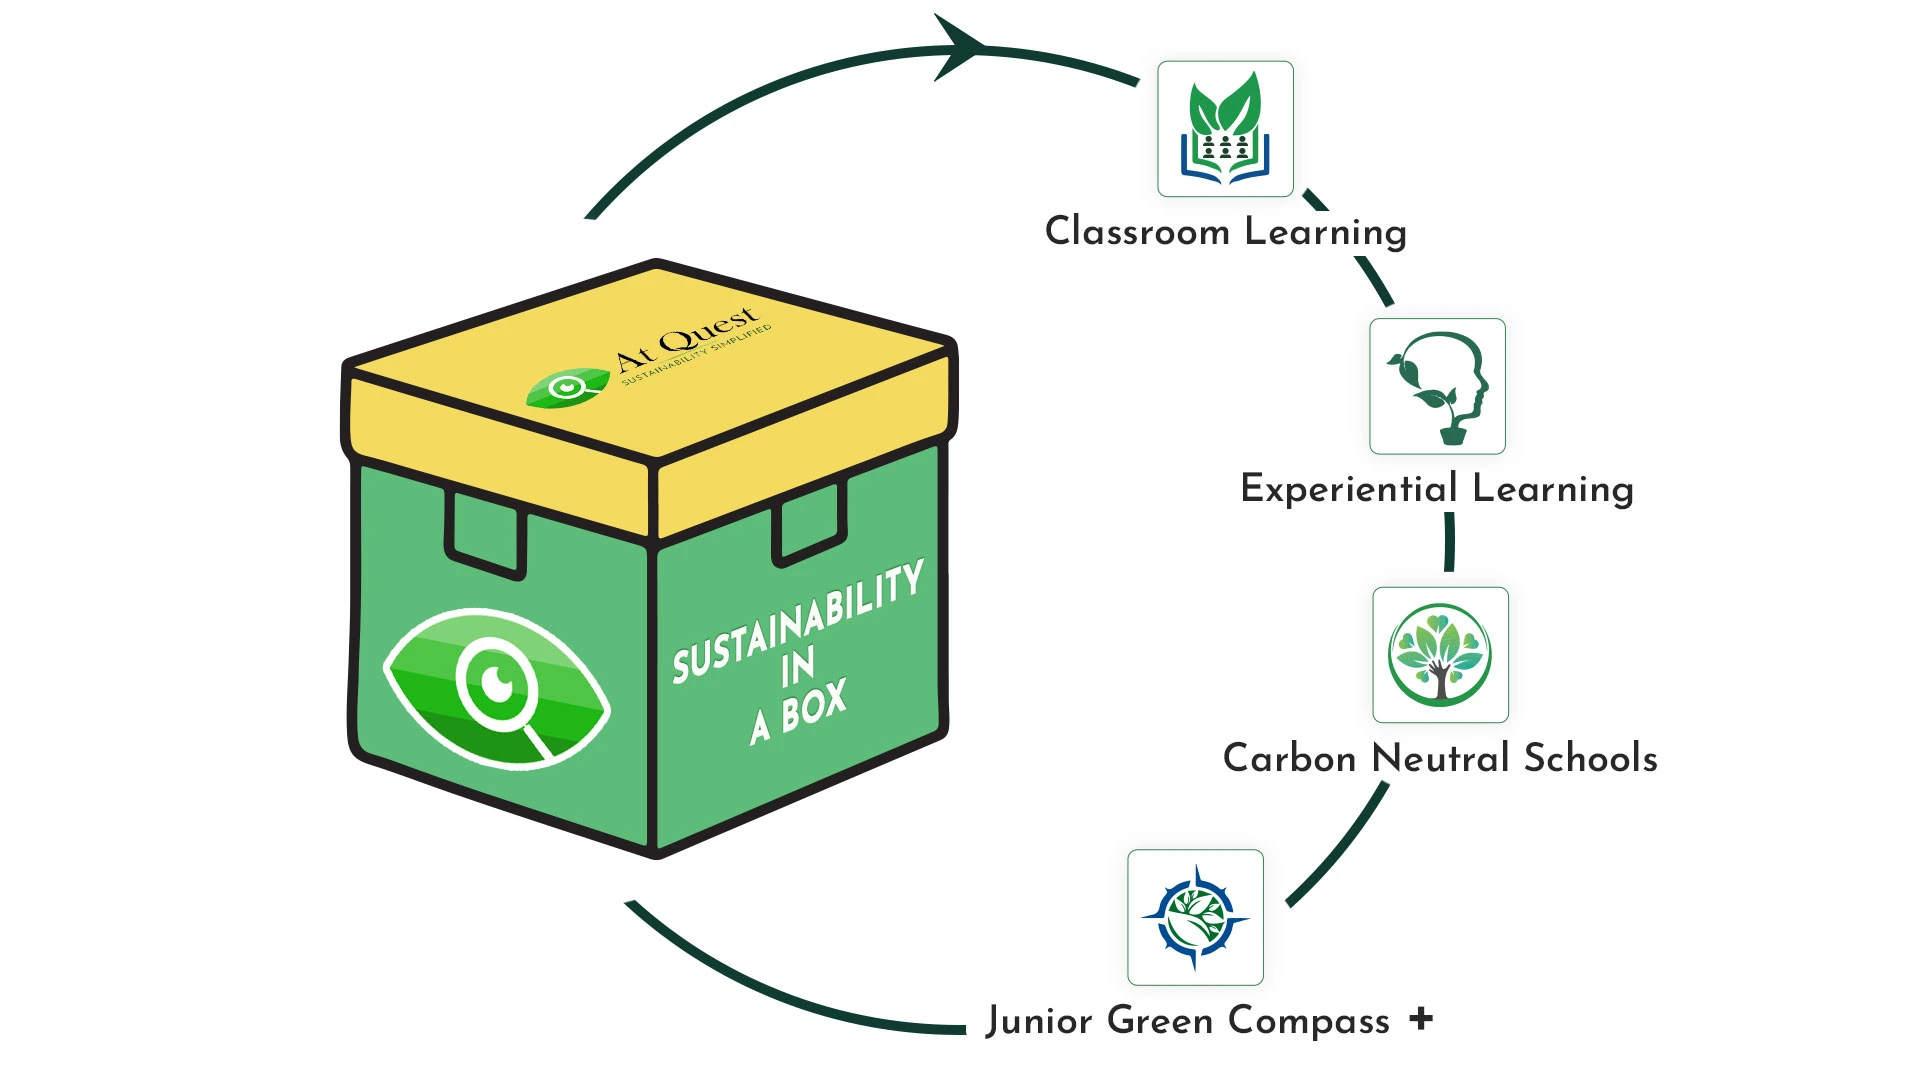 Bundle of 4 unique learning components – Classroom Learning, Experiential Learning, Carbon Neutral Schools and Junior Green Compass +